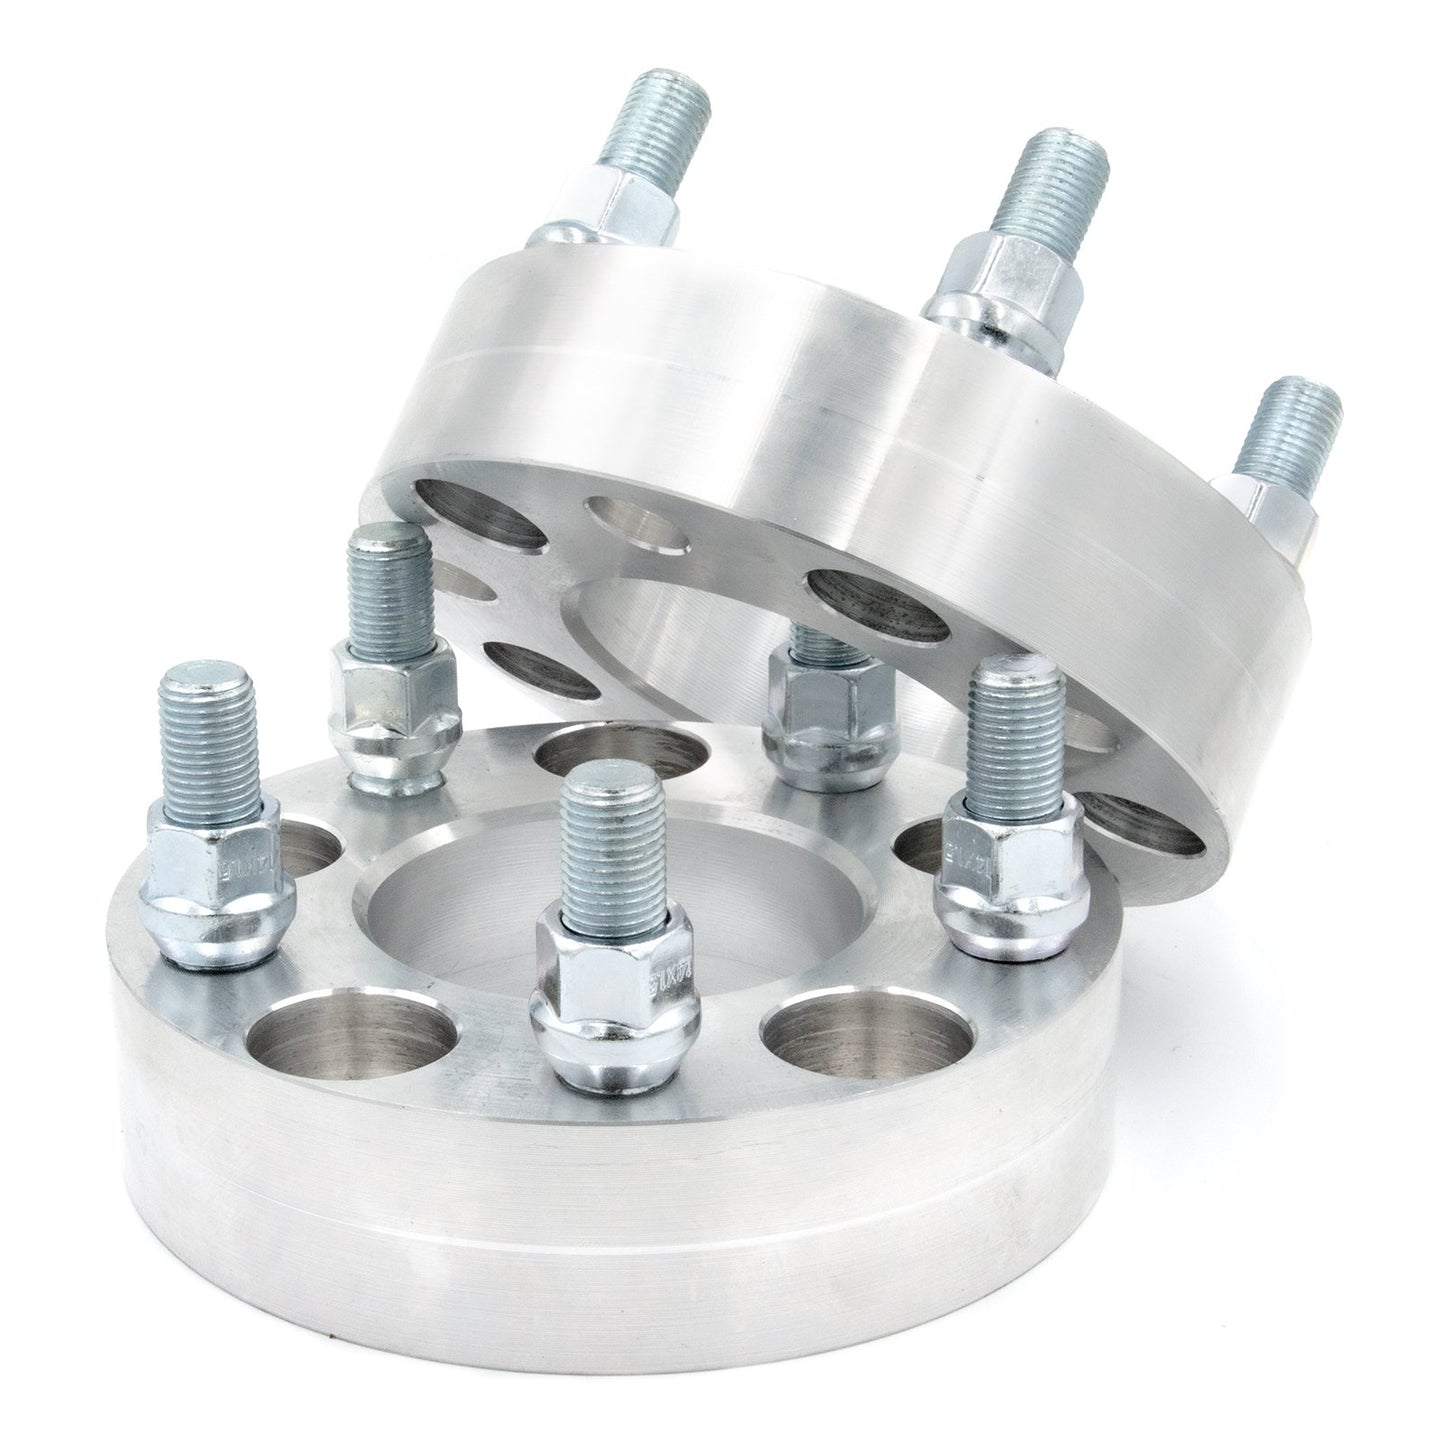 5x110 to 5x115 Wheel Spacer/Adapter - Thickness: 3/4"- 4"